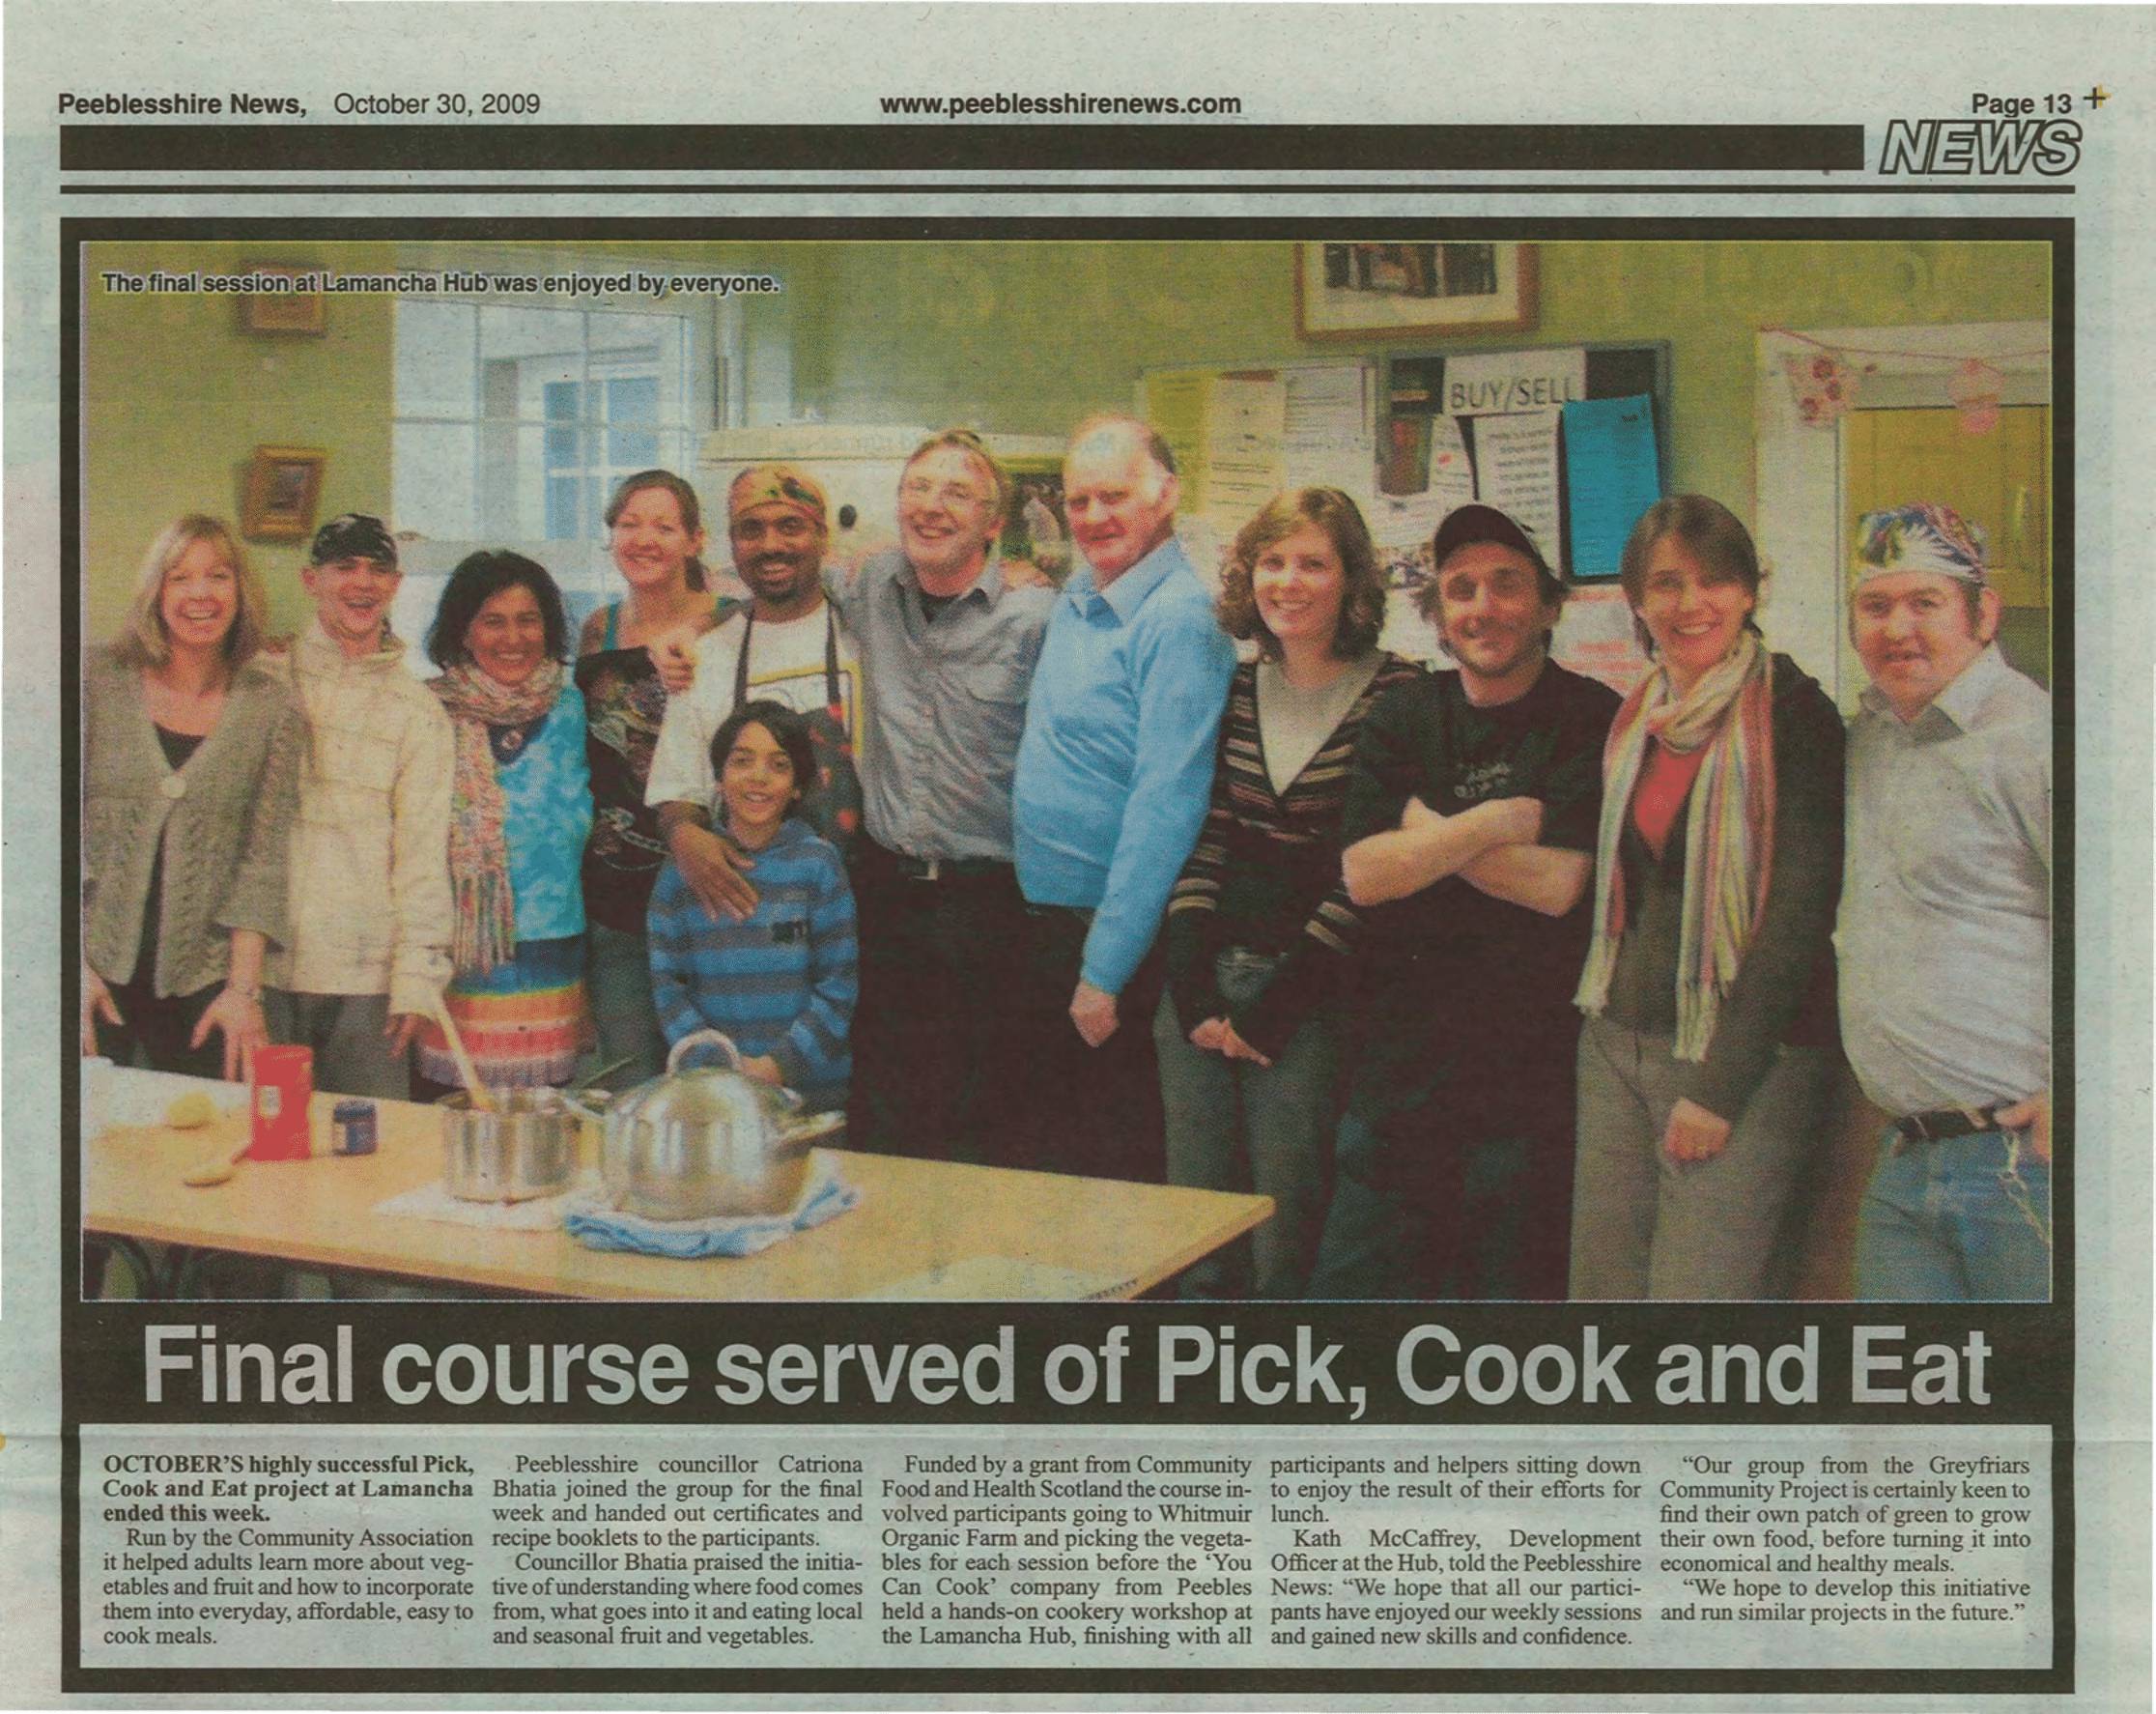 Press Clipping: Final course served of Pick, Cook and Eat